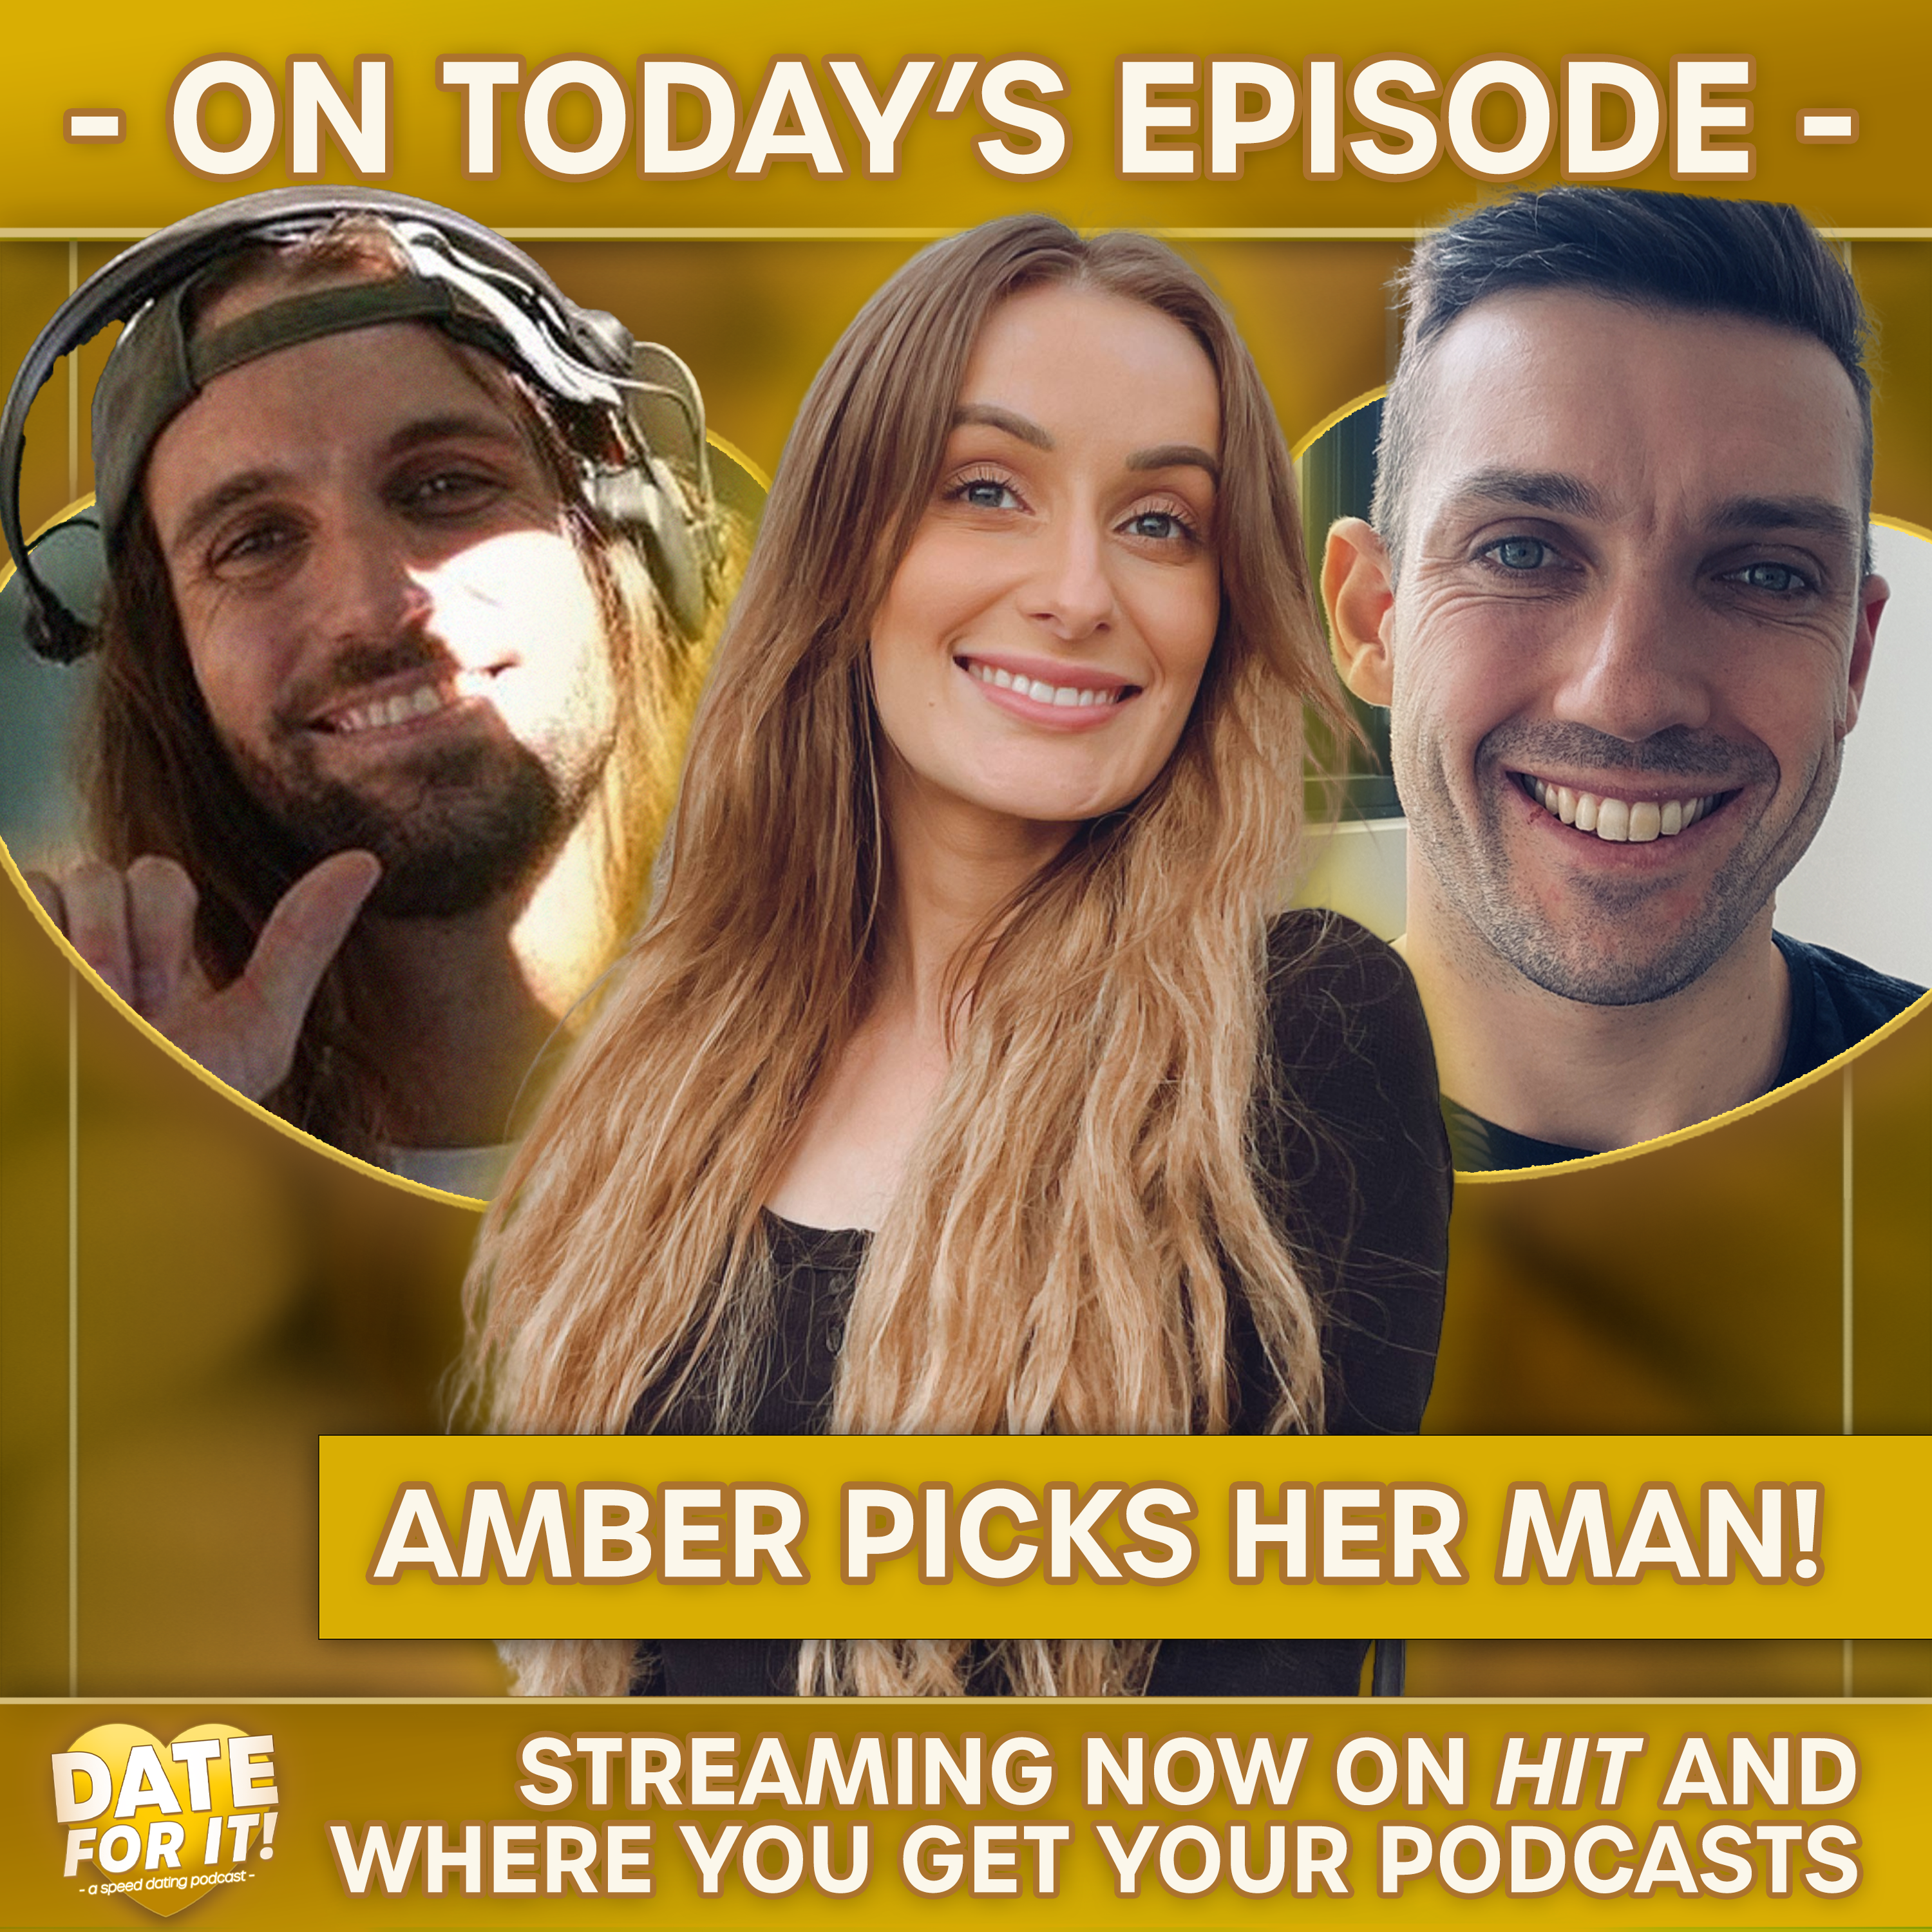 The Decider: Who Will Amber Choose?